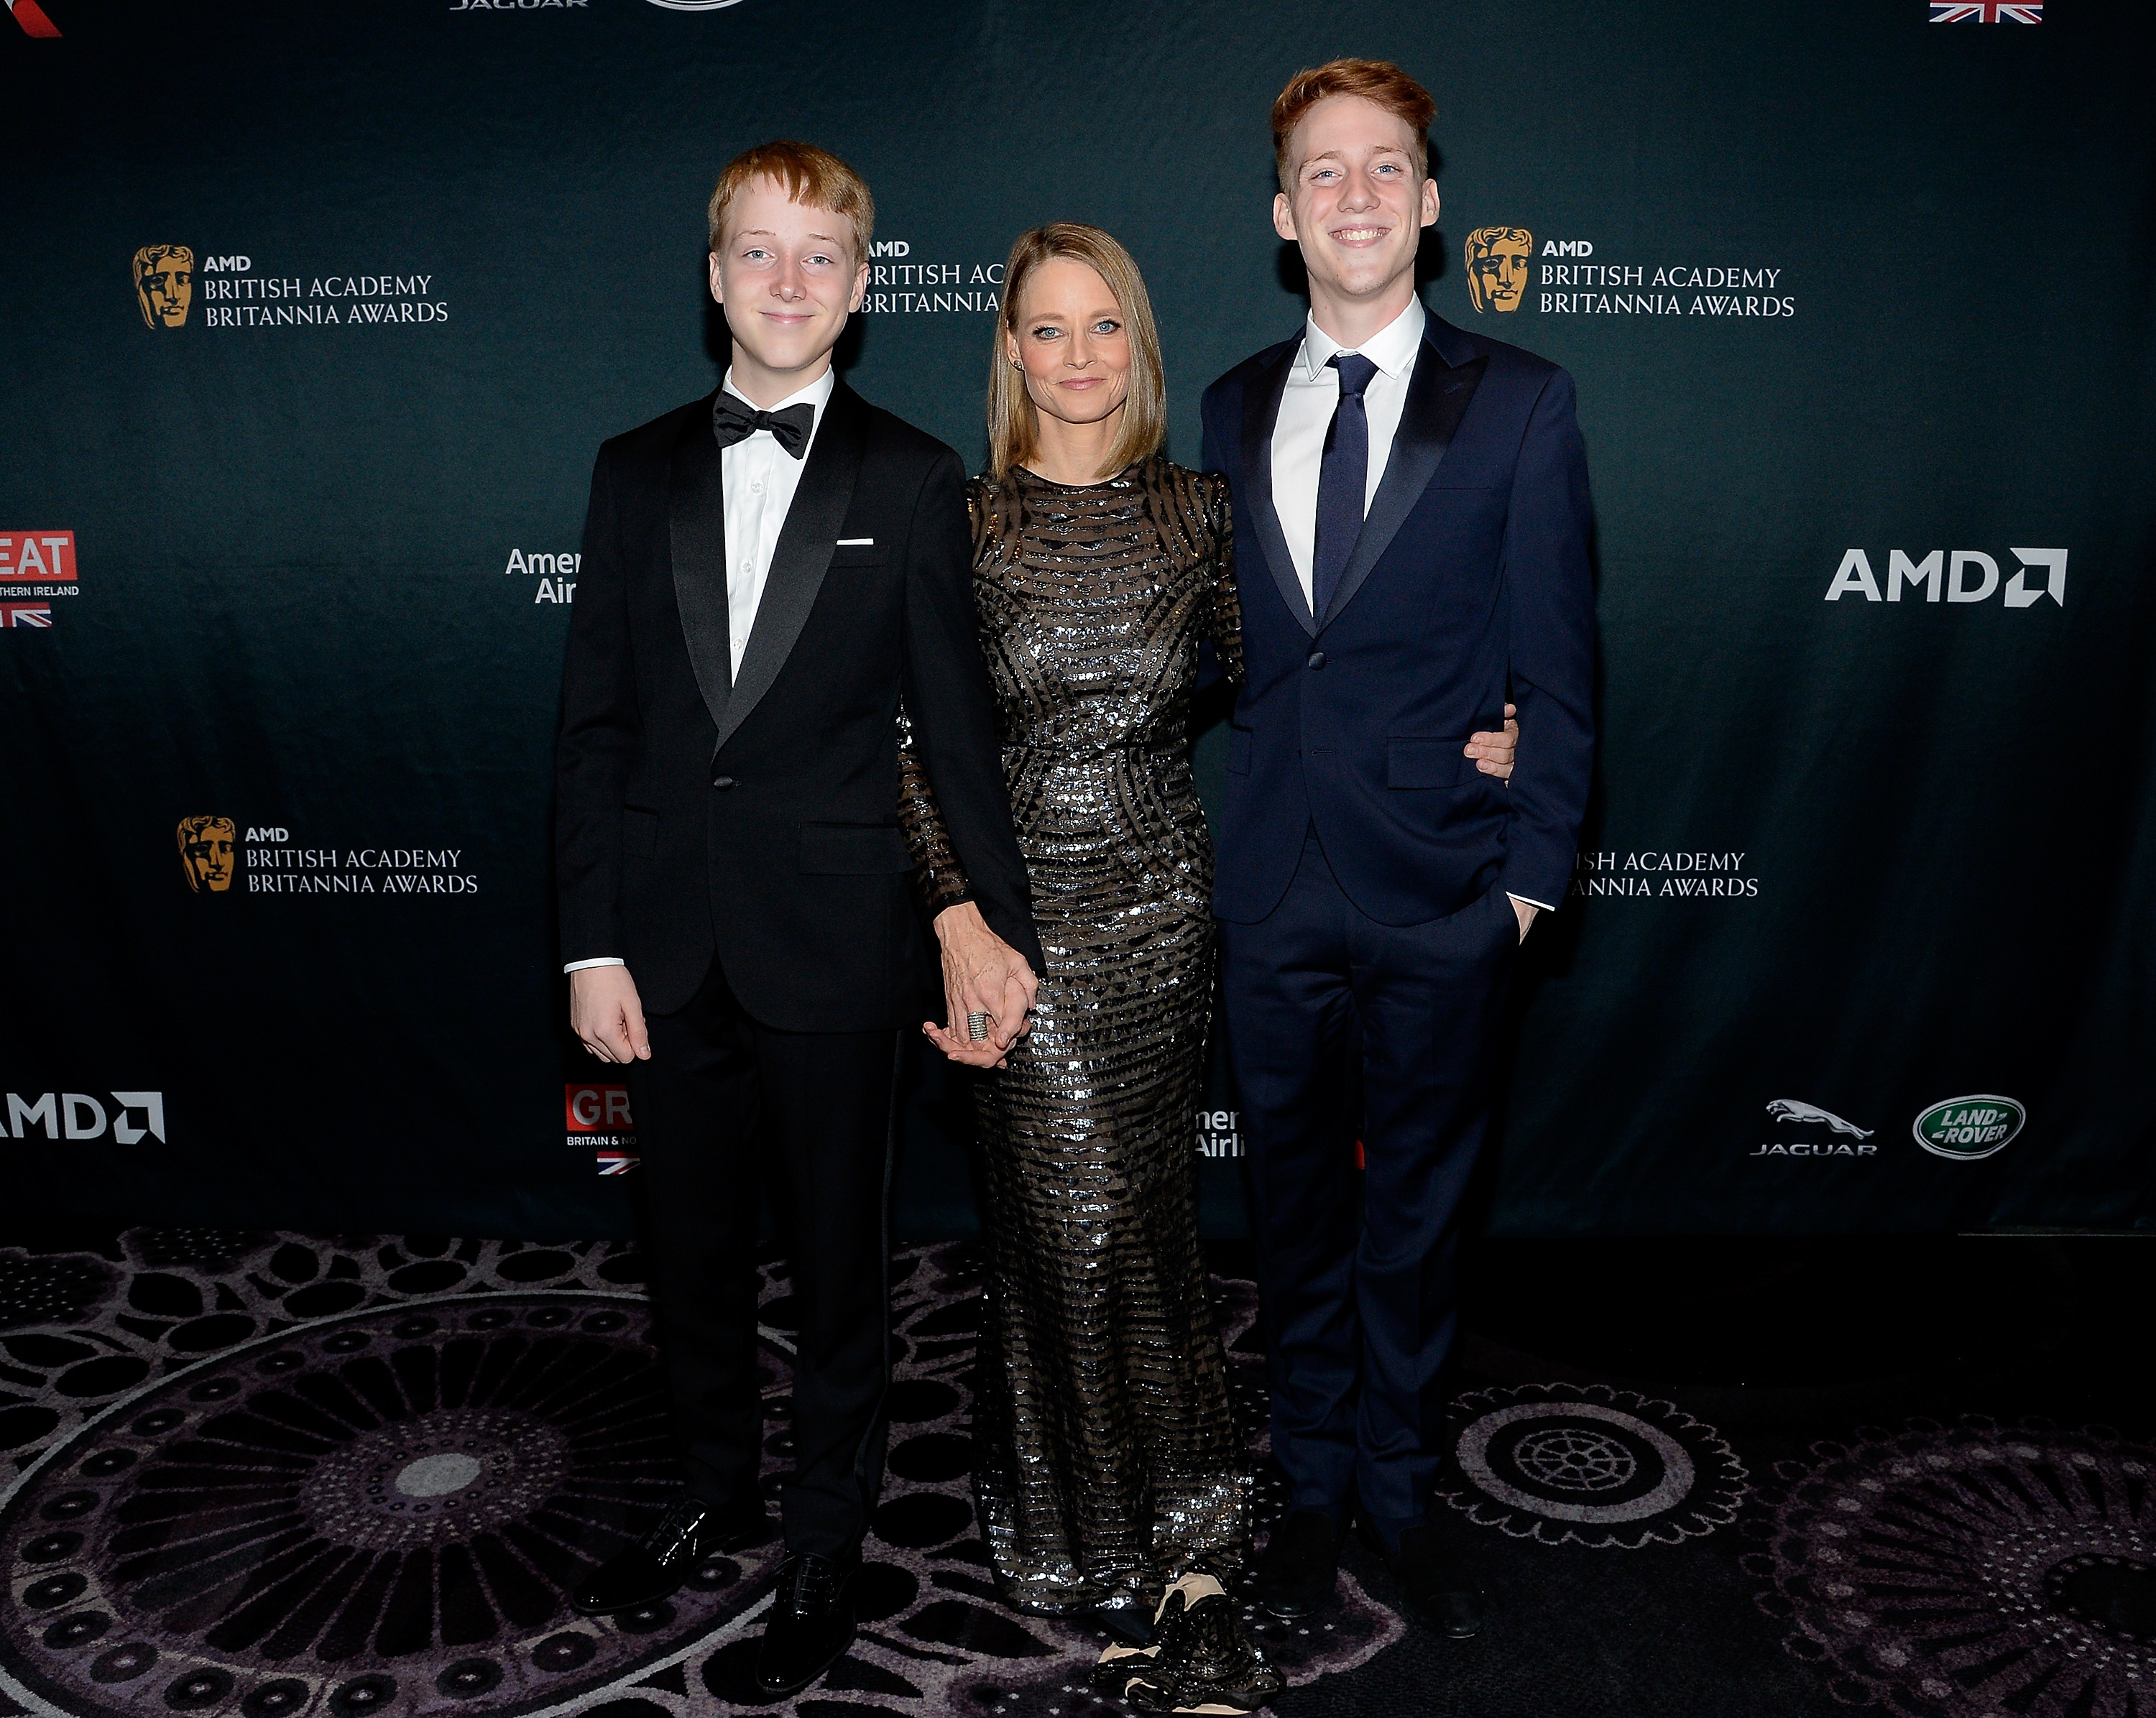 Jodie Foster with Kit and Charles at the AMD British Academy Britannia Awards in Beverly Hills, California on October 28, 2016 | Source: Getty Images